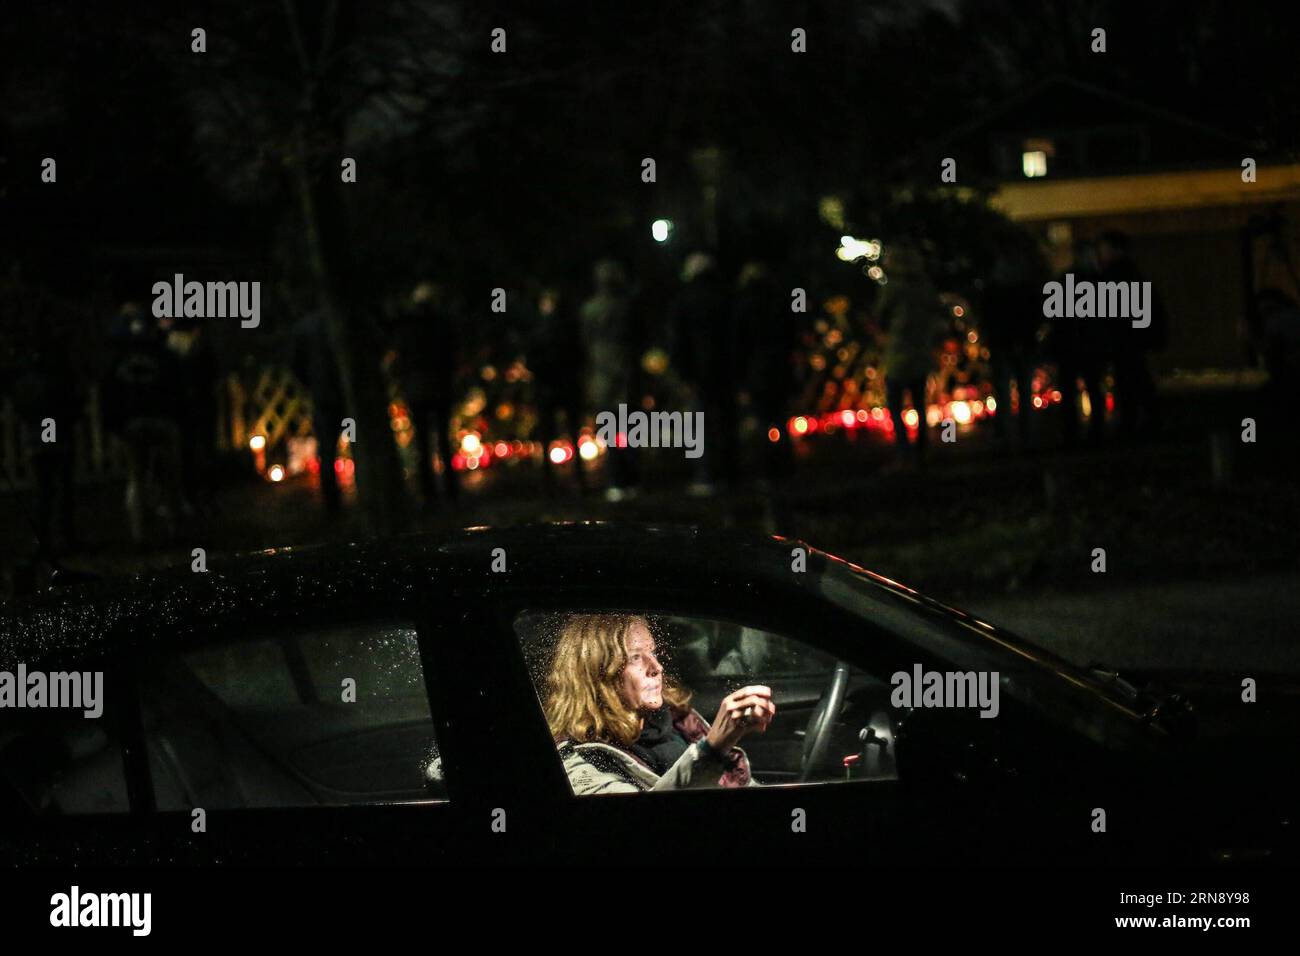 (151110) -- HAMBURG, Nov. 10, 2015 -- A woman parks her vehicle as local residents lay flowers and candles outside the home of former German chancellor Helmut Schmidt, in Hamburg, Germany, on Nov. 10, 2015. Helmut Schmidt, who served as Chancellor of West Germany from 1974 to 1982, died at age of 96 at his home in Hamburg on Tuesday afternoon, according to German media. ) GERMANY-HAMBURG-SCHMIDT-PASSING AWAY ZhangxFan PUBLICATIONxNOTxINxCHN Stille Trauer vor Helmut Schmidts Wohnhaus in Hamburg   Hamburg Nov 10 2015 a Woman Parks her Vehicle As Local Residents Lay Flowers and Candles outside Th Stock Photo